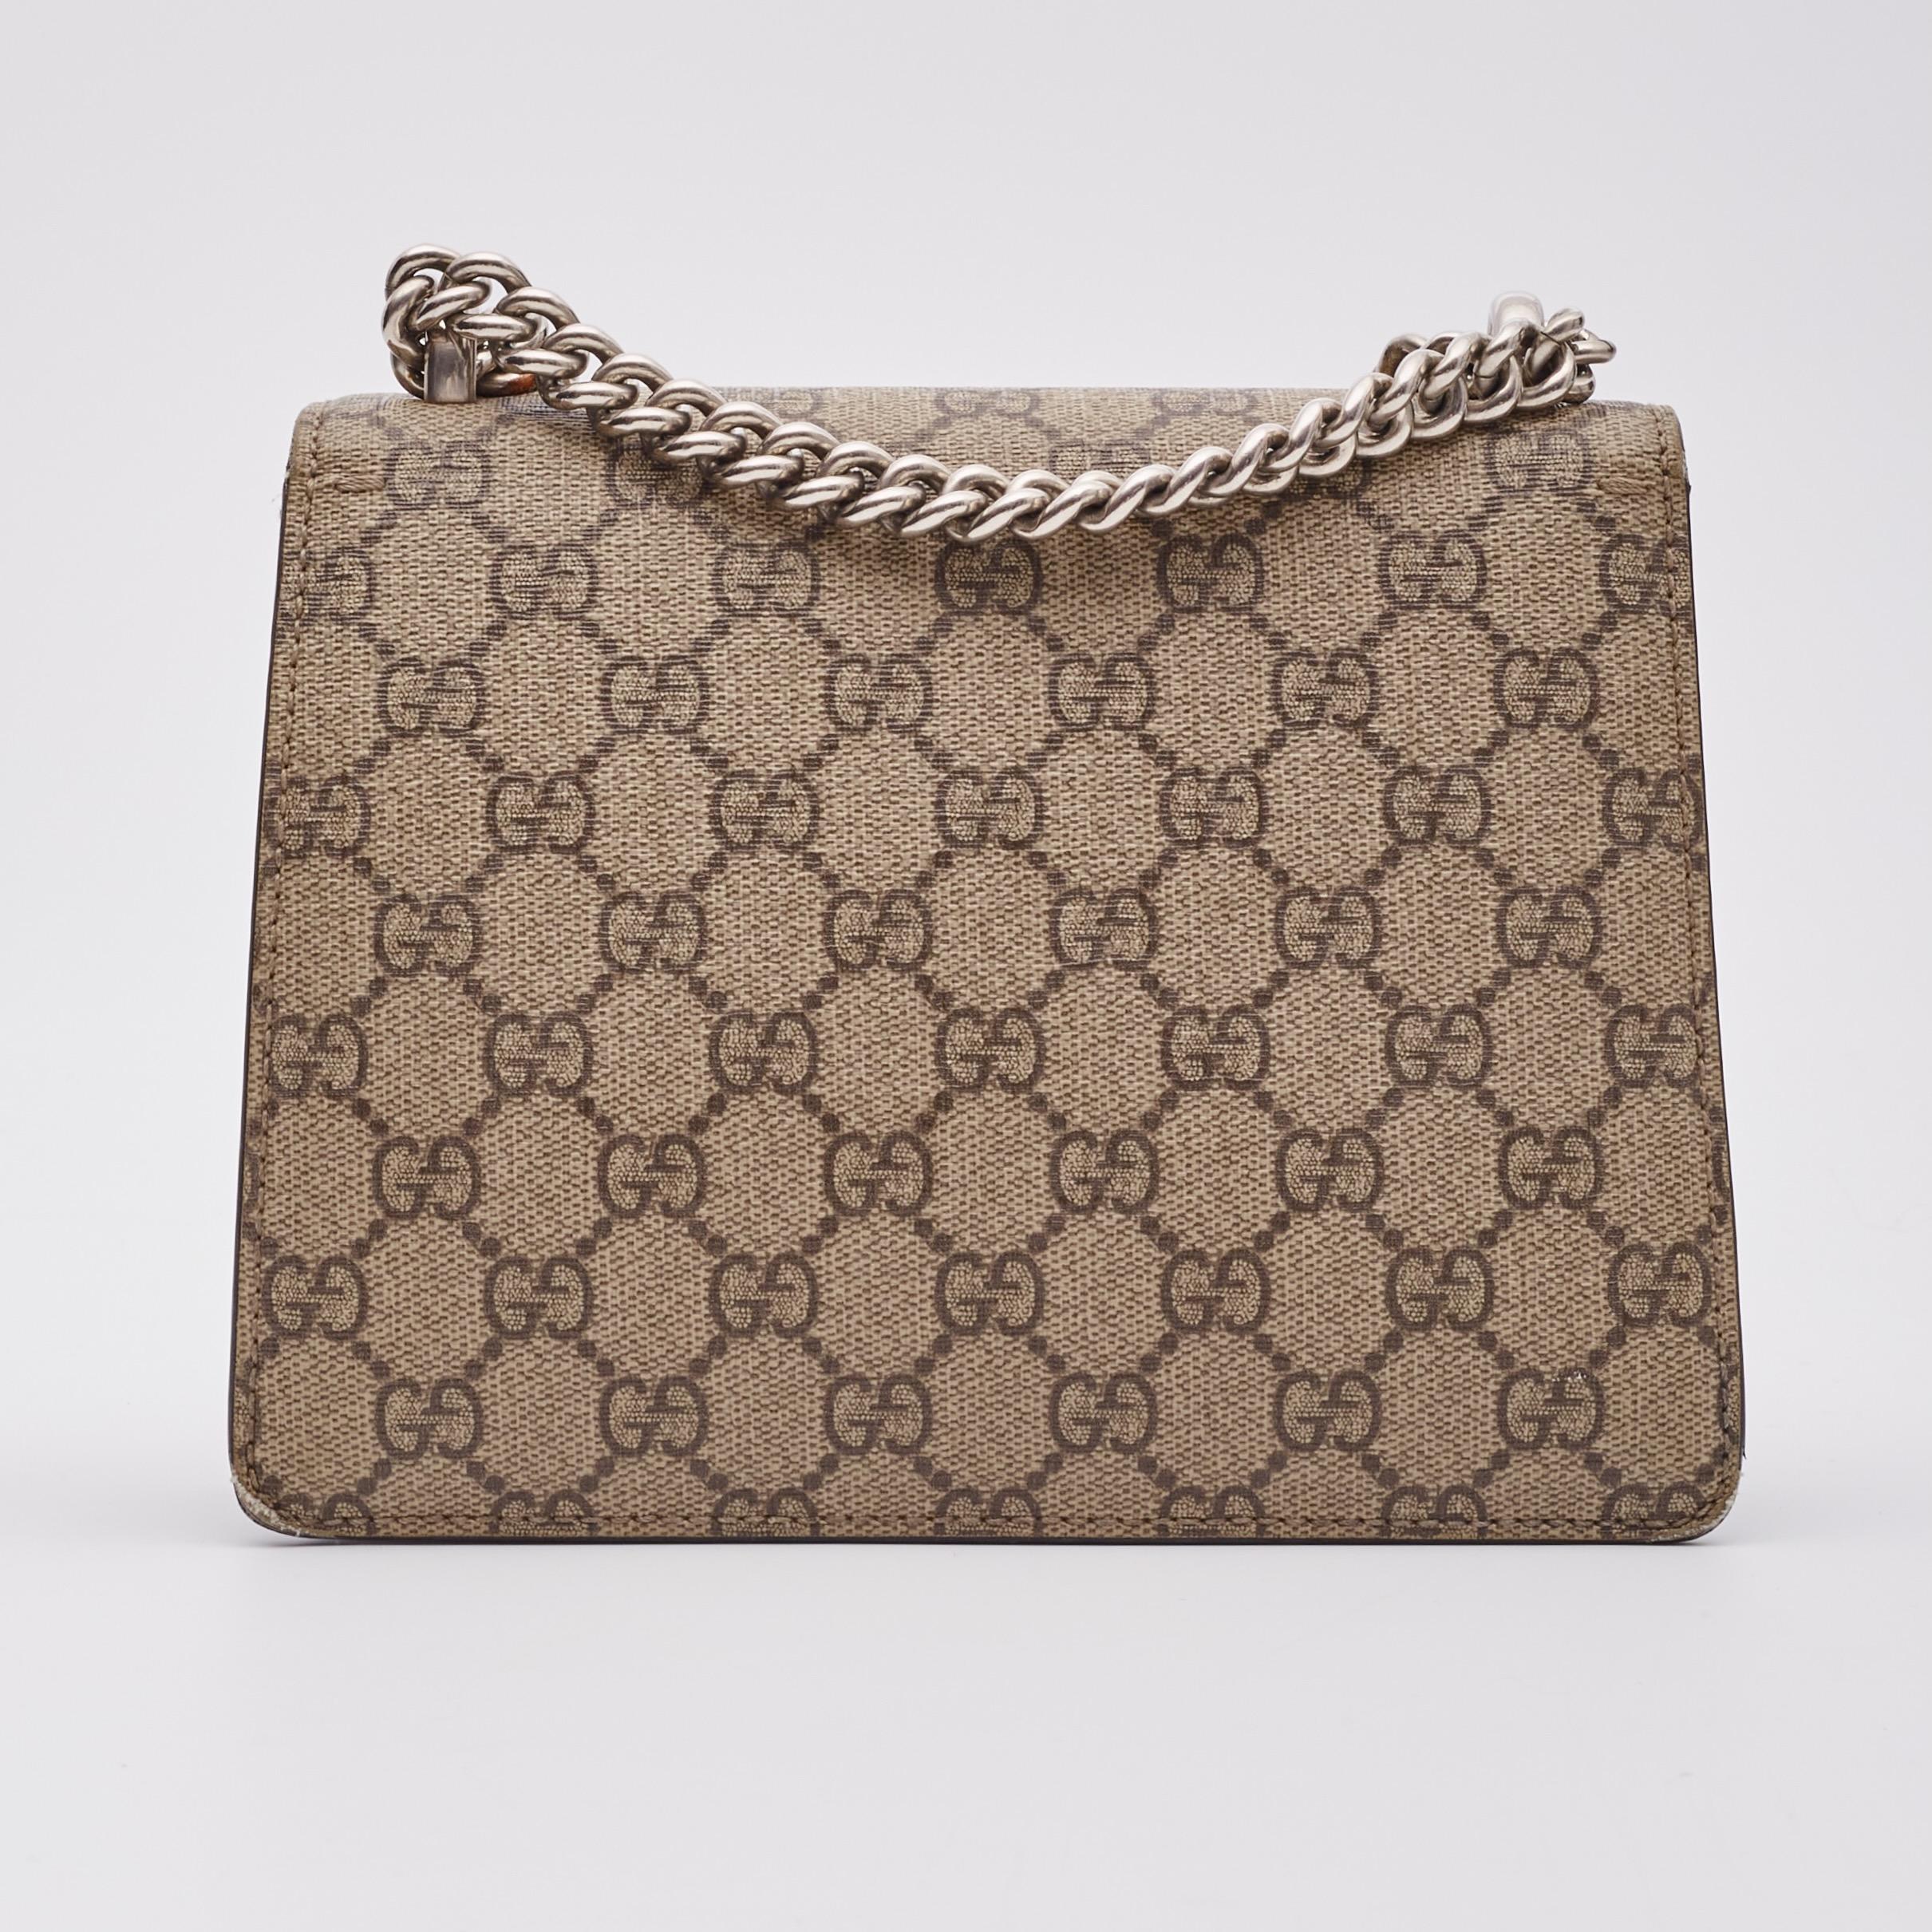 This bag is made of traditional Gucci GG monogram supreme canvas. The bag features an aged silver chain shoulder strap, and a textured horseshoe tiger spur closure. The double flap opens to reveal an exterior black suede flap and a coated canvas